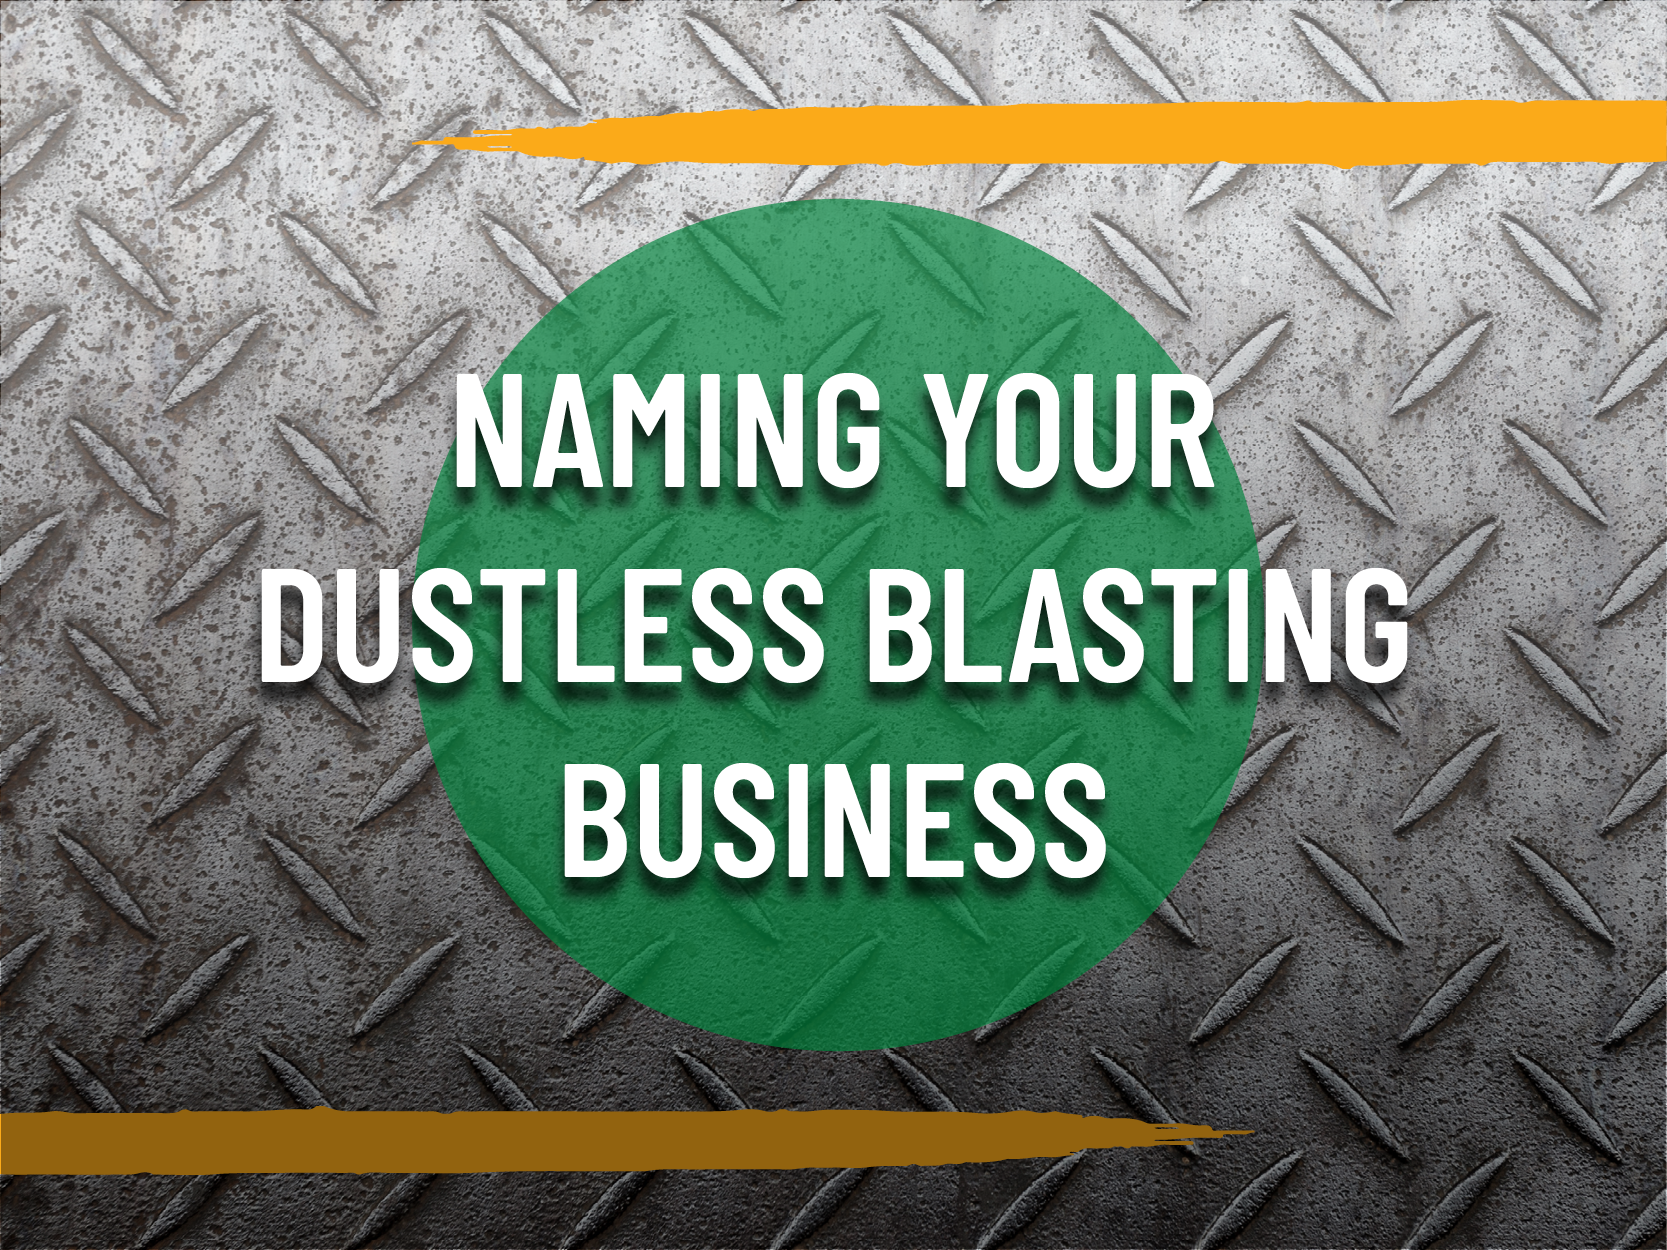 title blog image - naming your business